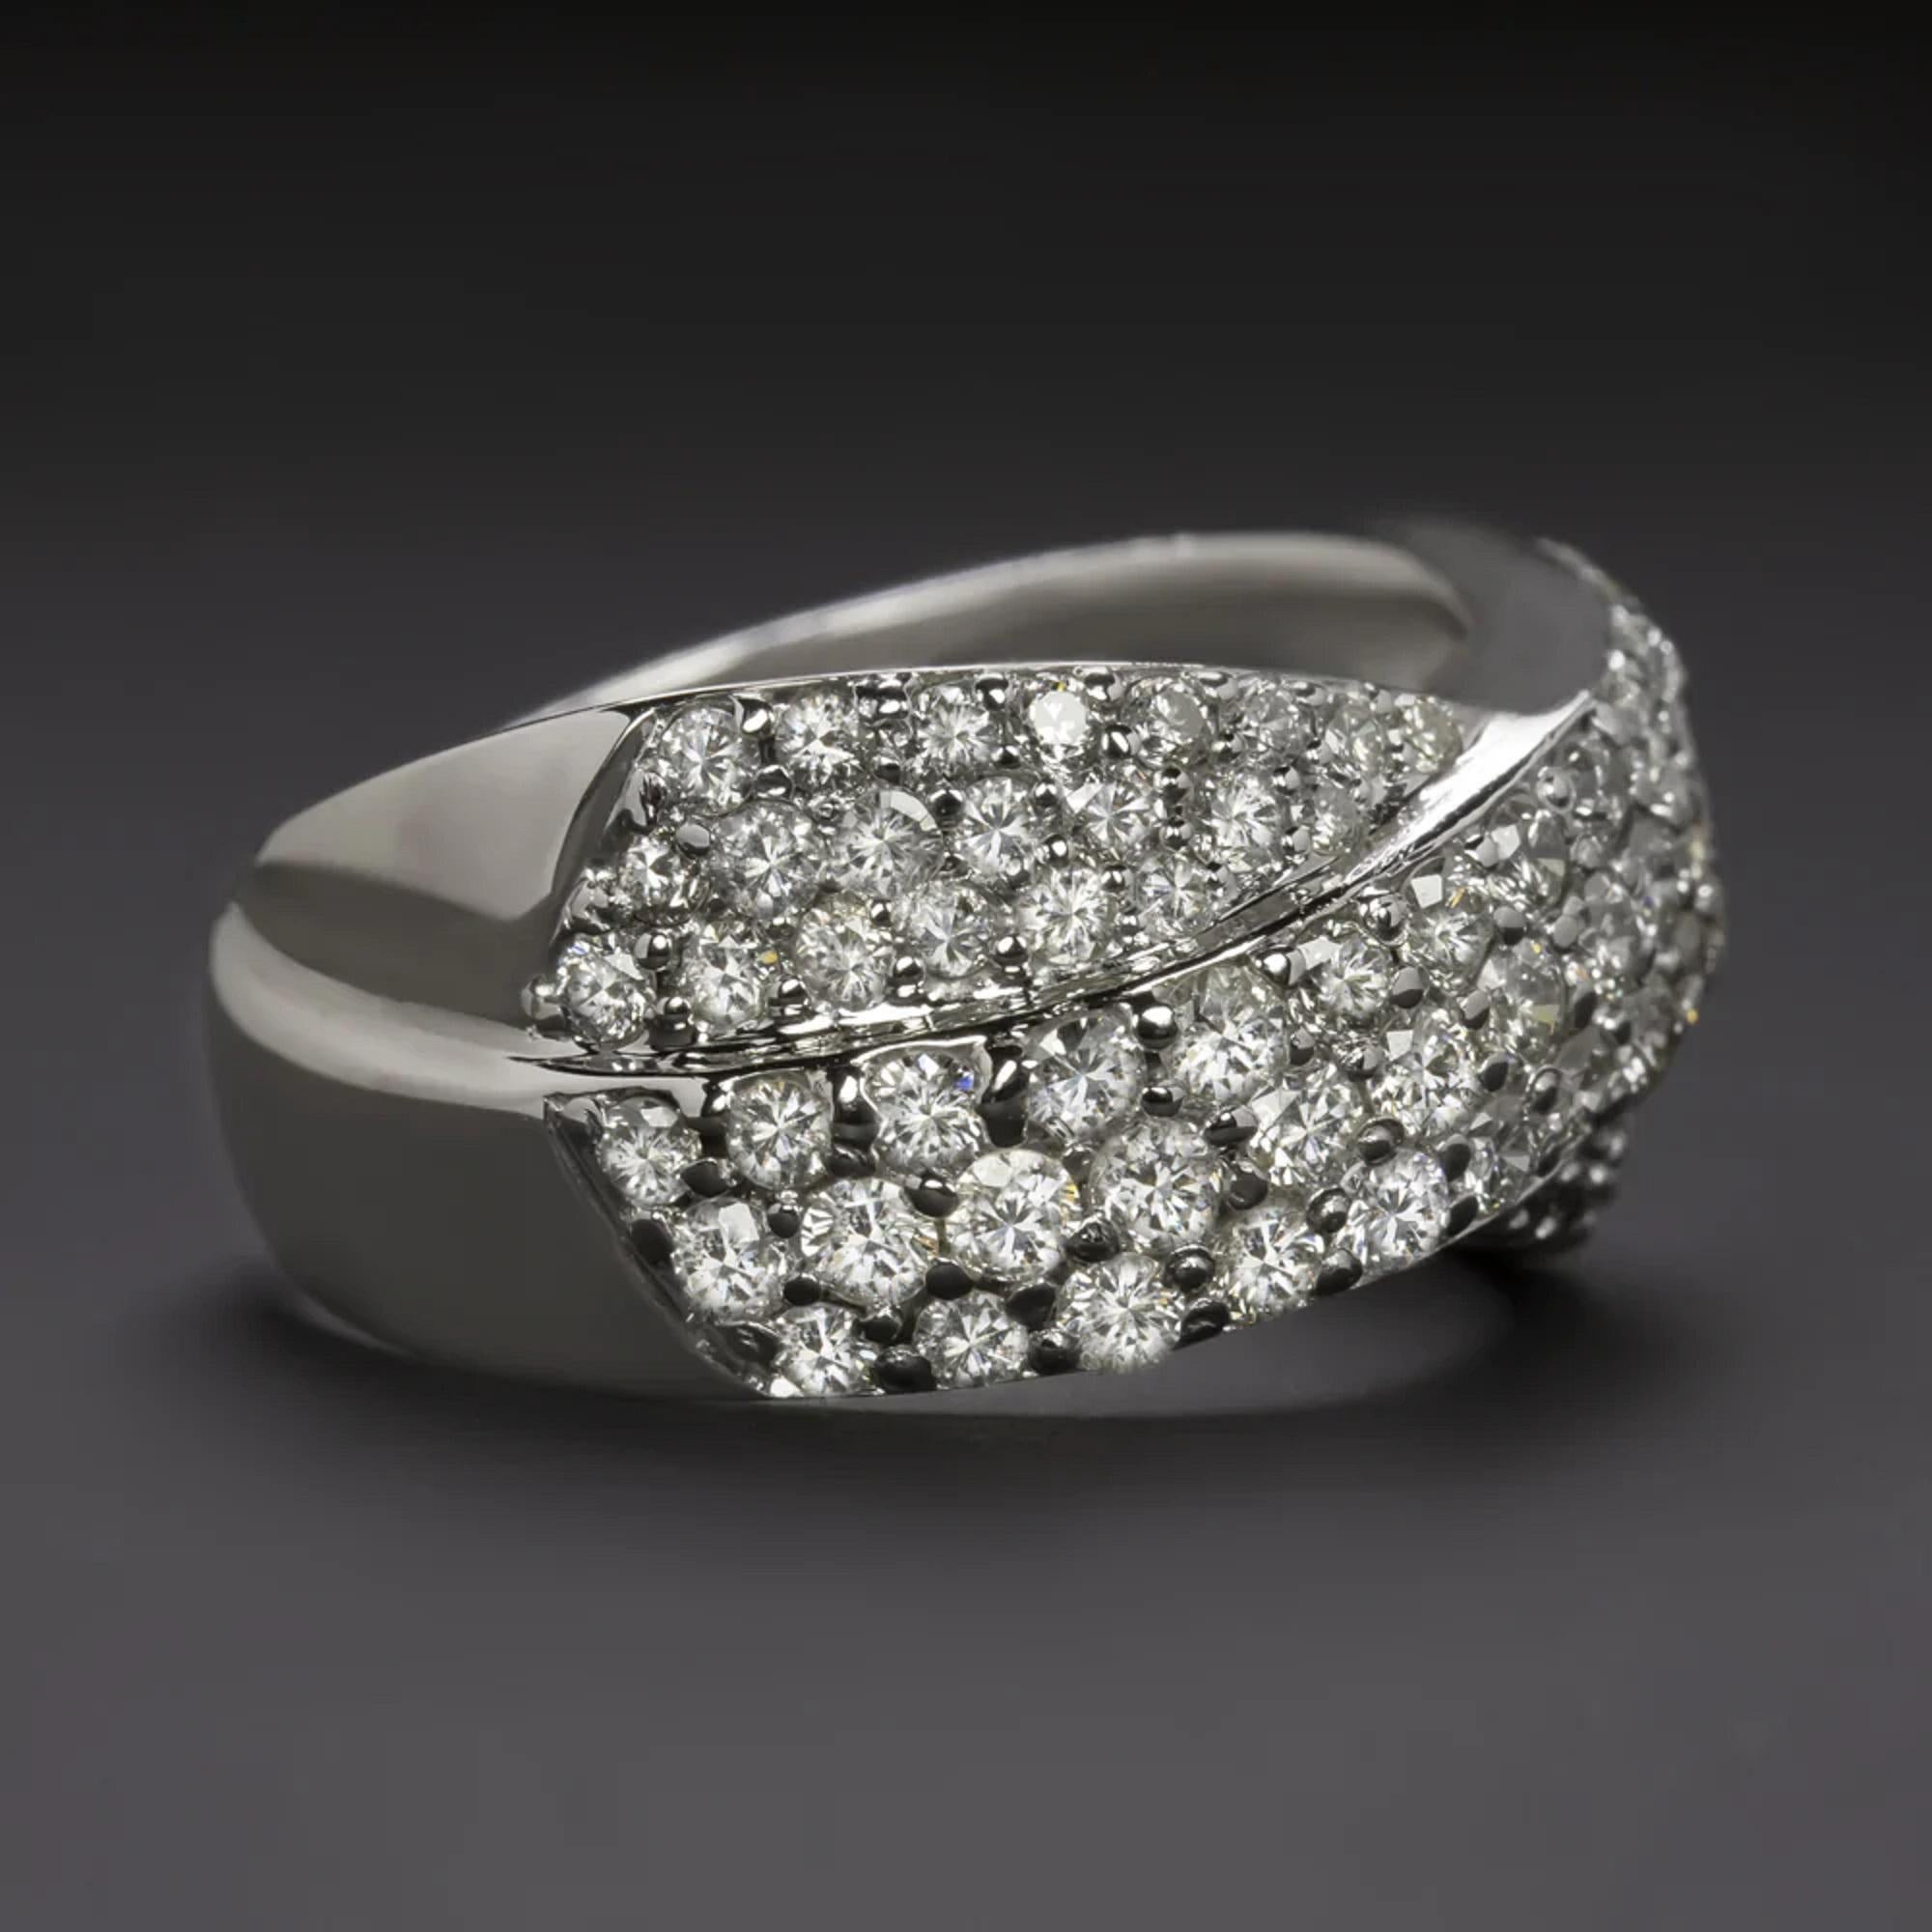 two carats of high quality diamonds, this solid white gold cocktail ring is full of glamorous sparkle! The ring is elegantly designed in 14k white gold with dynamic, interwoven bands of pave set diamonds. Measuring over 10mm across, the ring has a